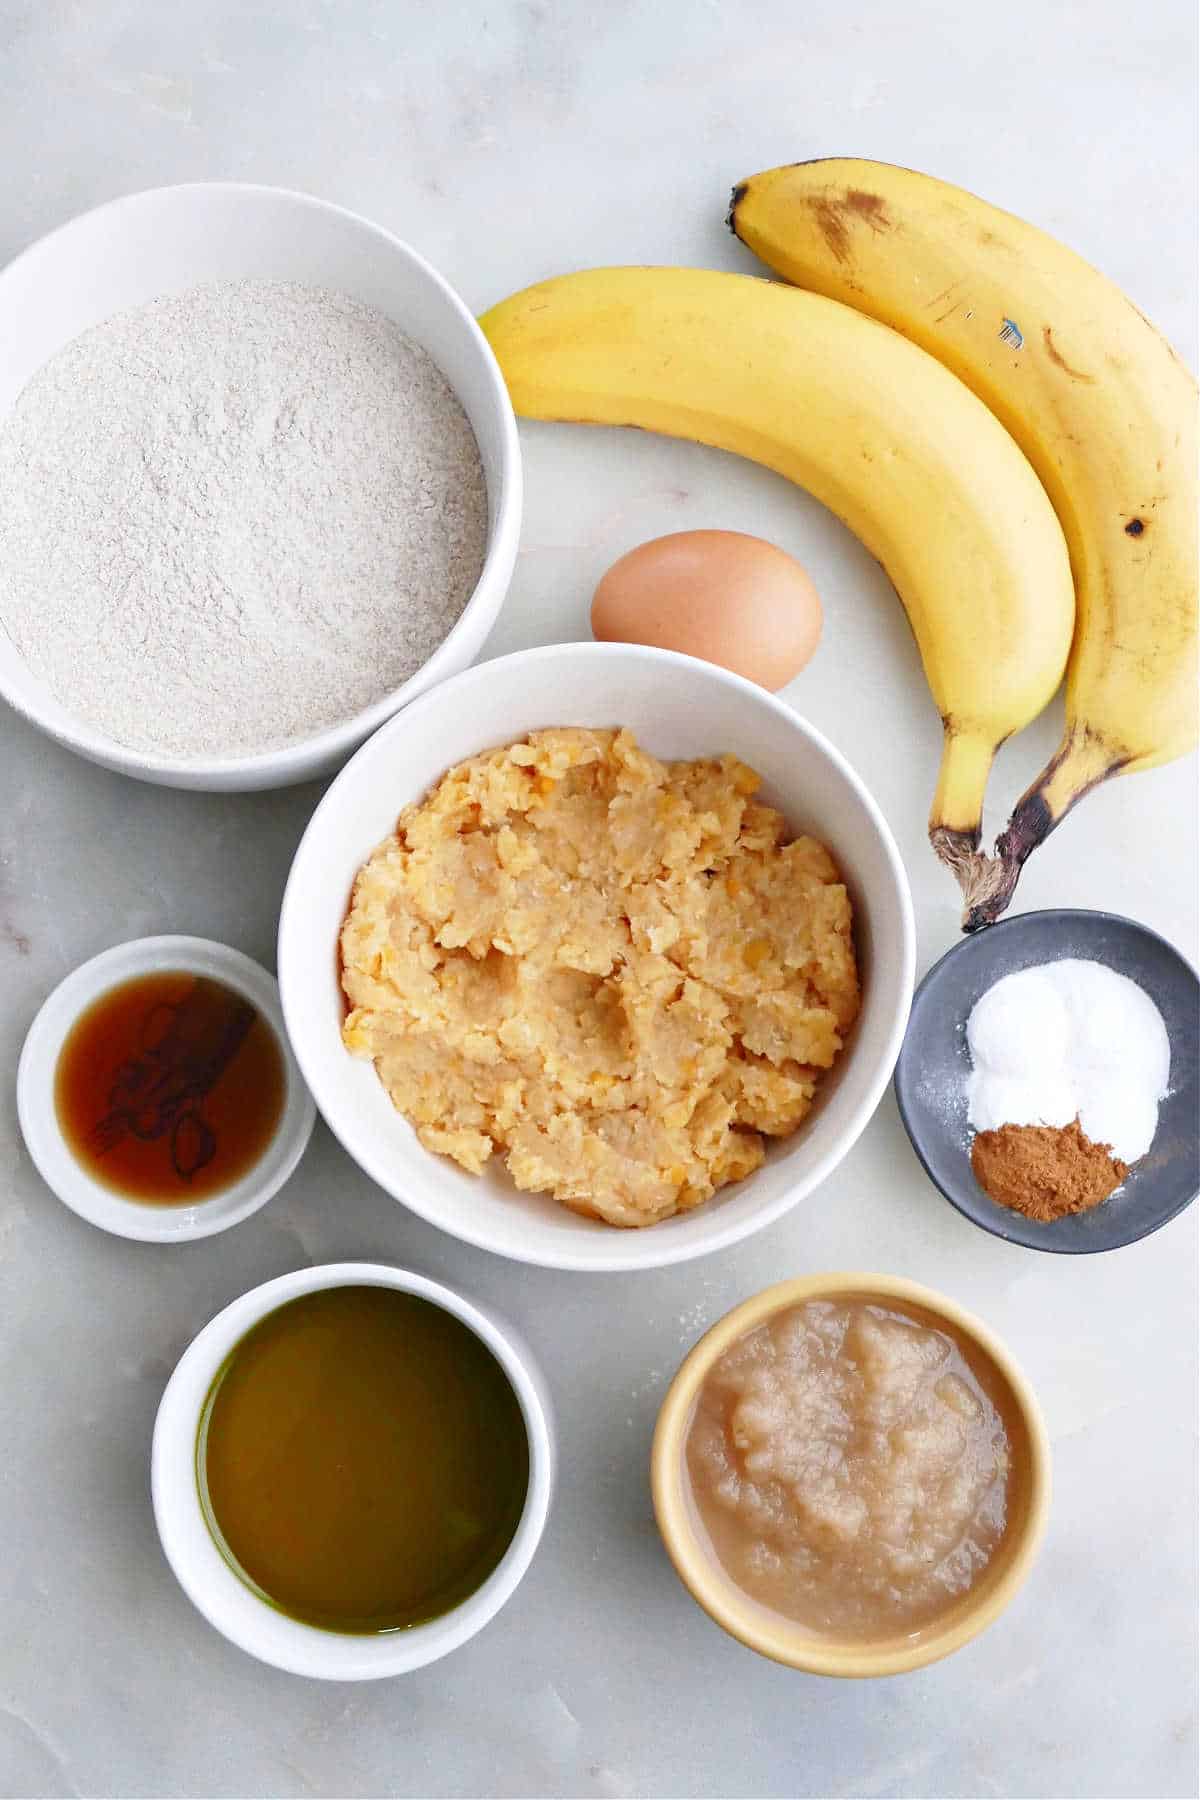 whole wheat flour, bananas, egg, spices, red lentils, applesauce, olive oil, and vanilla extract